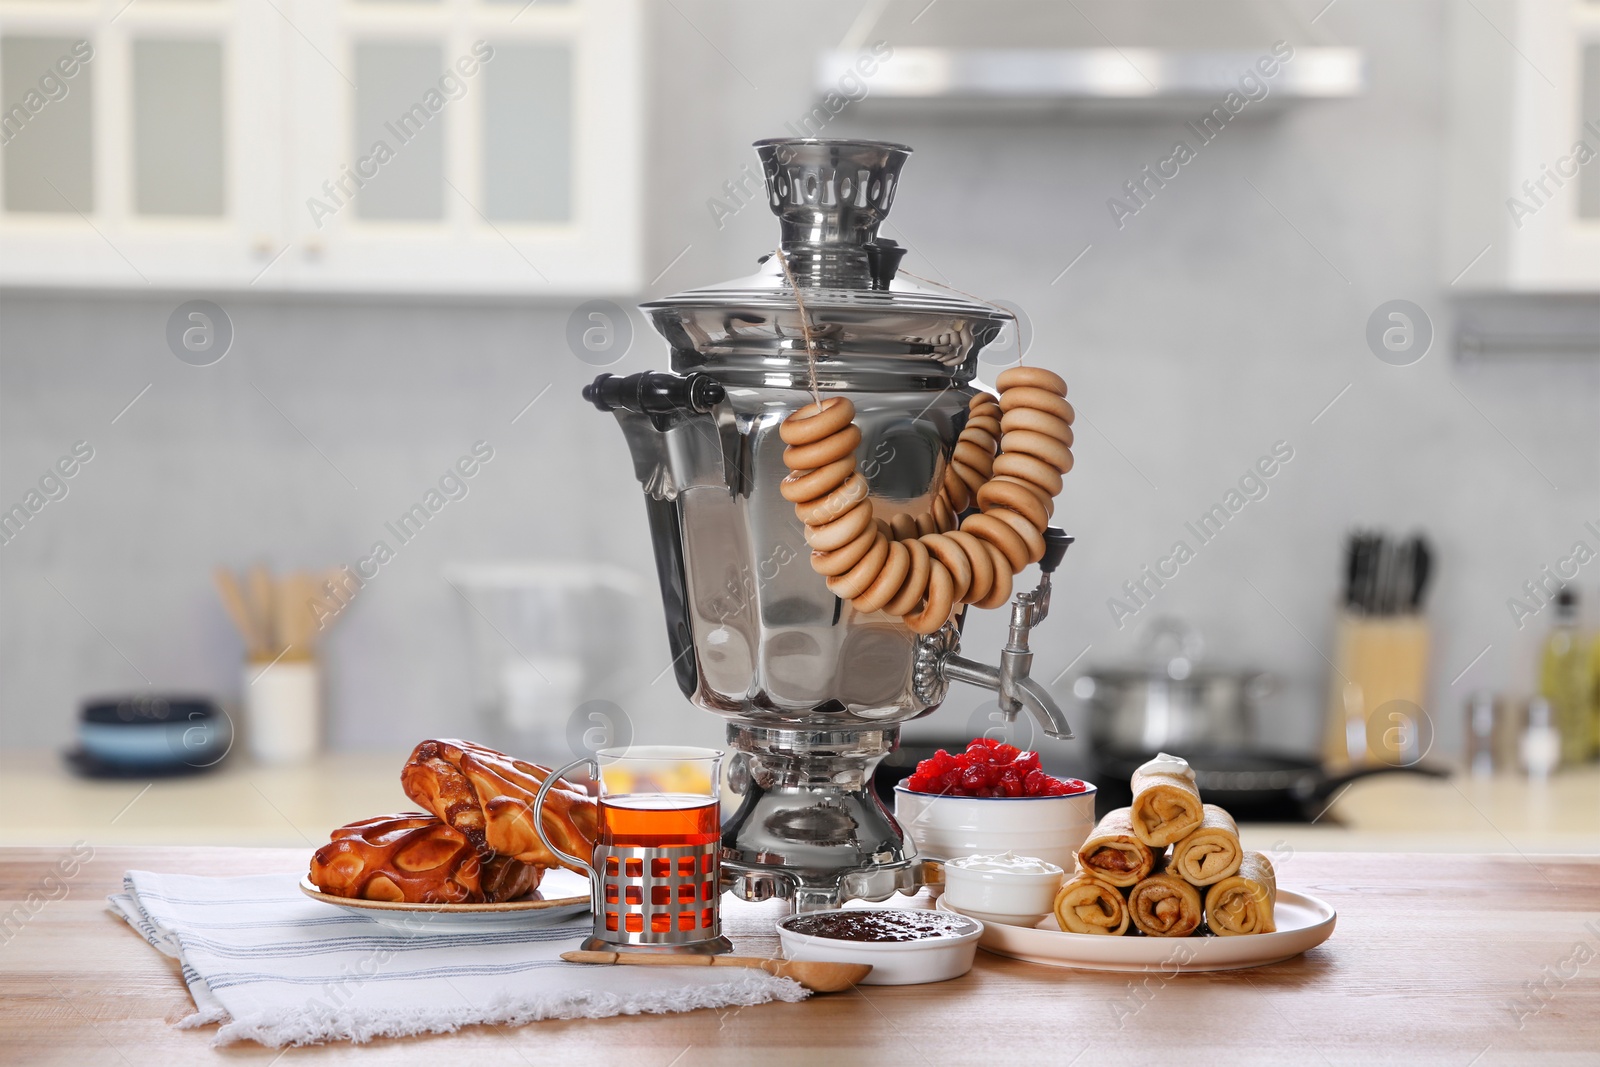 Image of Traditional Russian samovar and treats on wooden table in kitchen